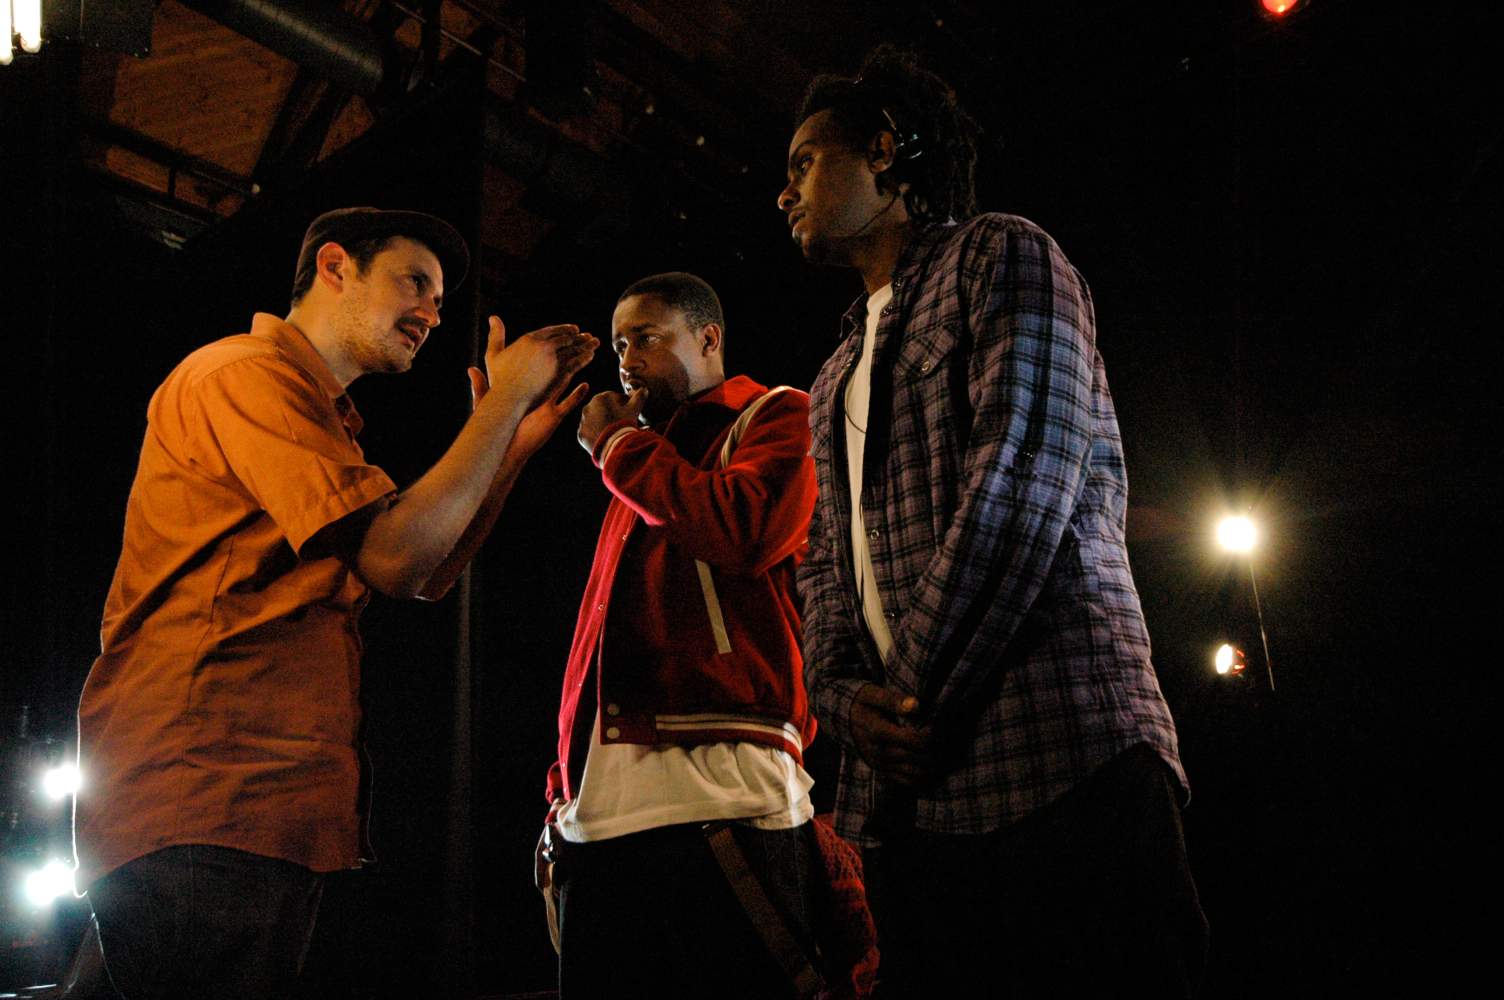 Directing on set for hip hop group Diafrixs Lets Go music video.